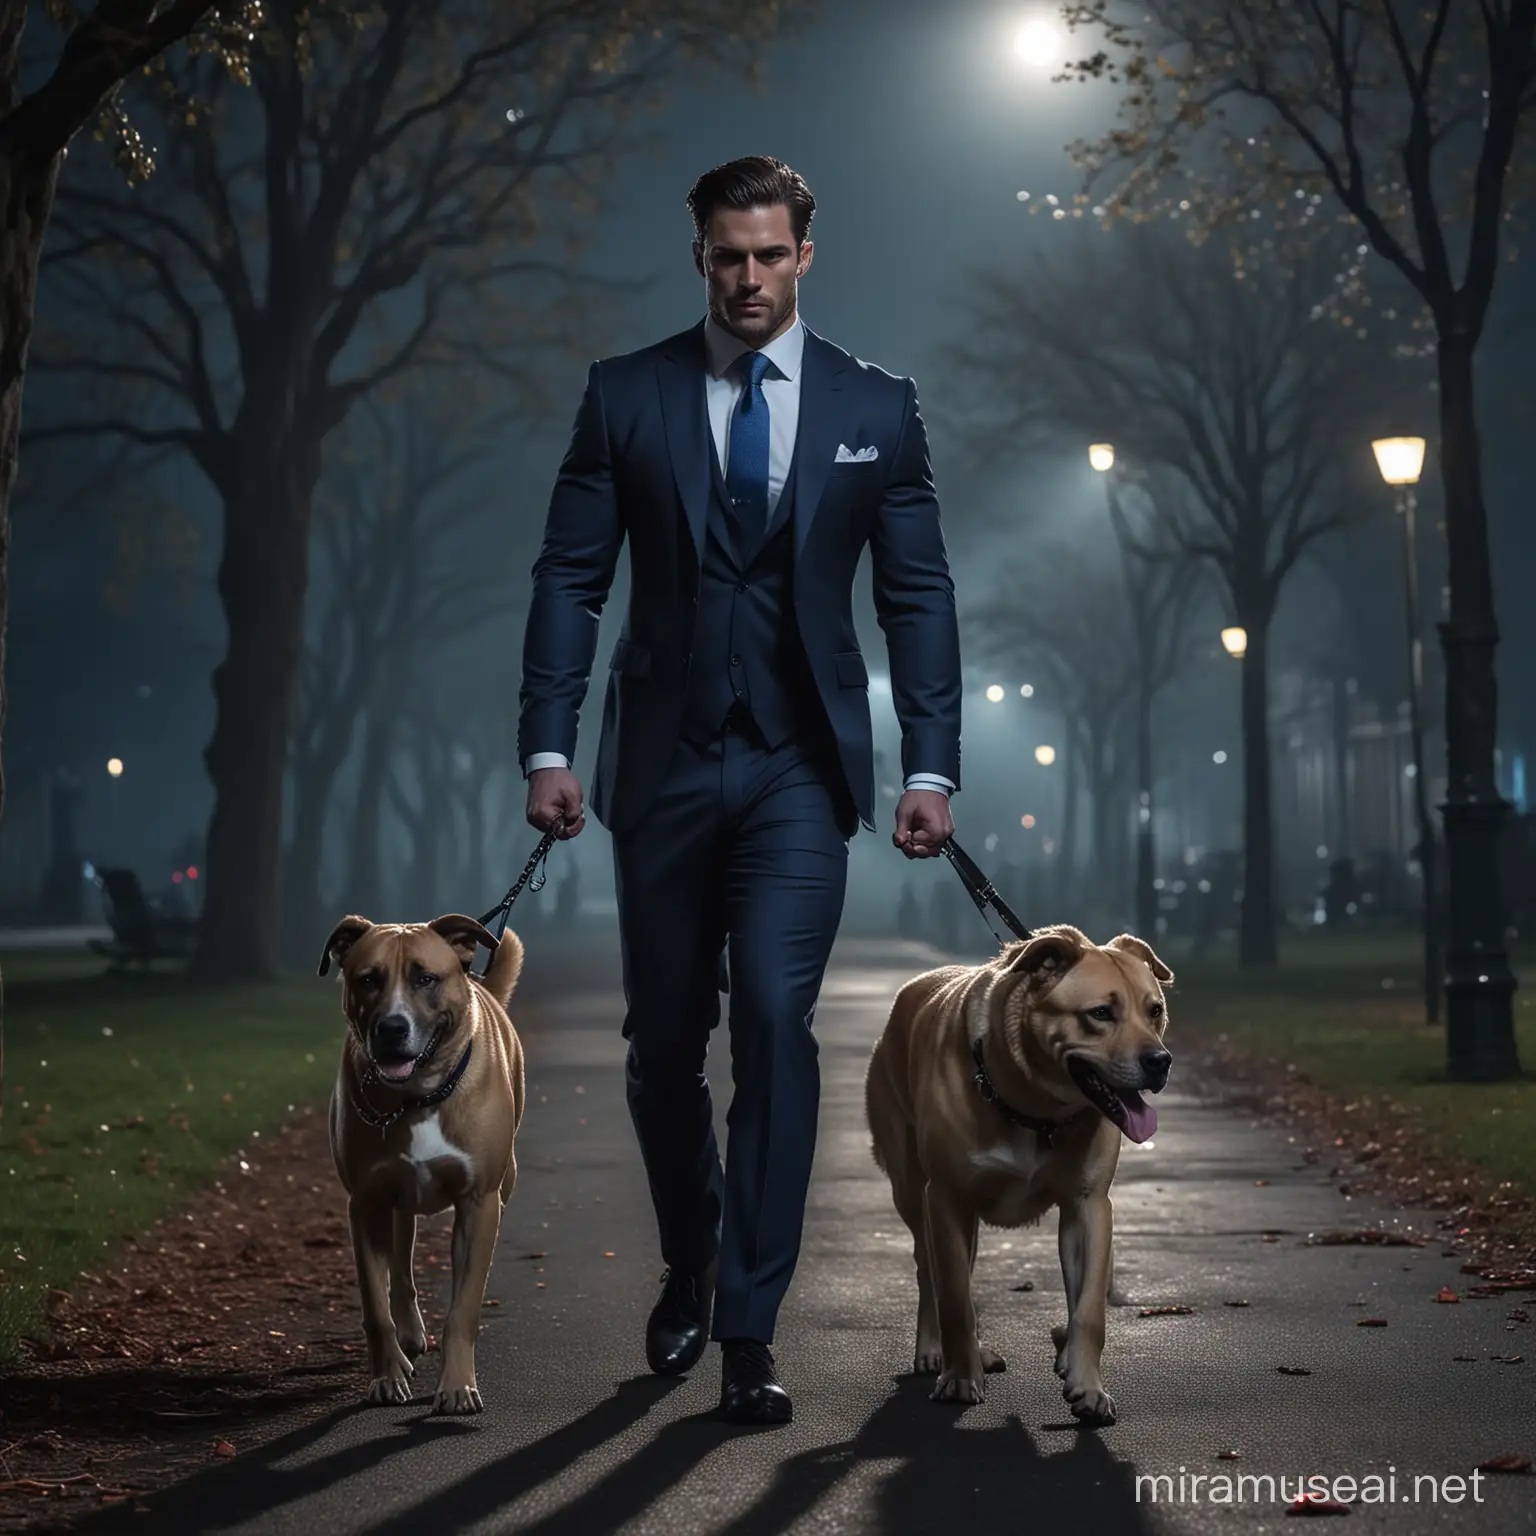 A very bulked muscular man dressed in a suit and shiny acccessories,   walking a fierce blood thirsty dog along a park, the background is of midnight with only moonlight shining blue light over the scene